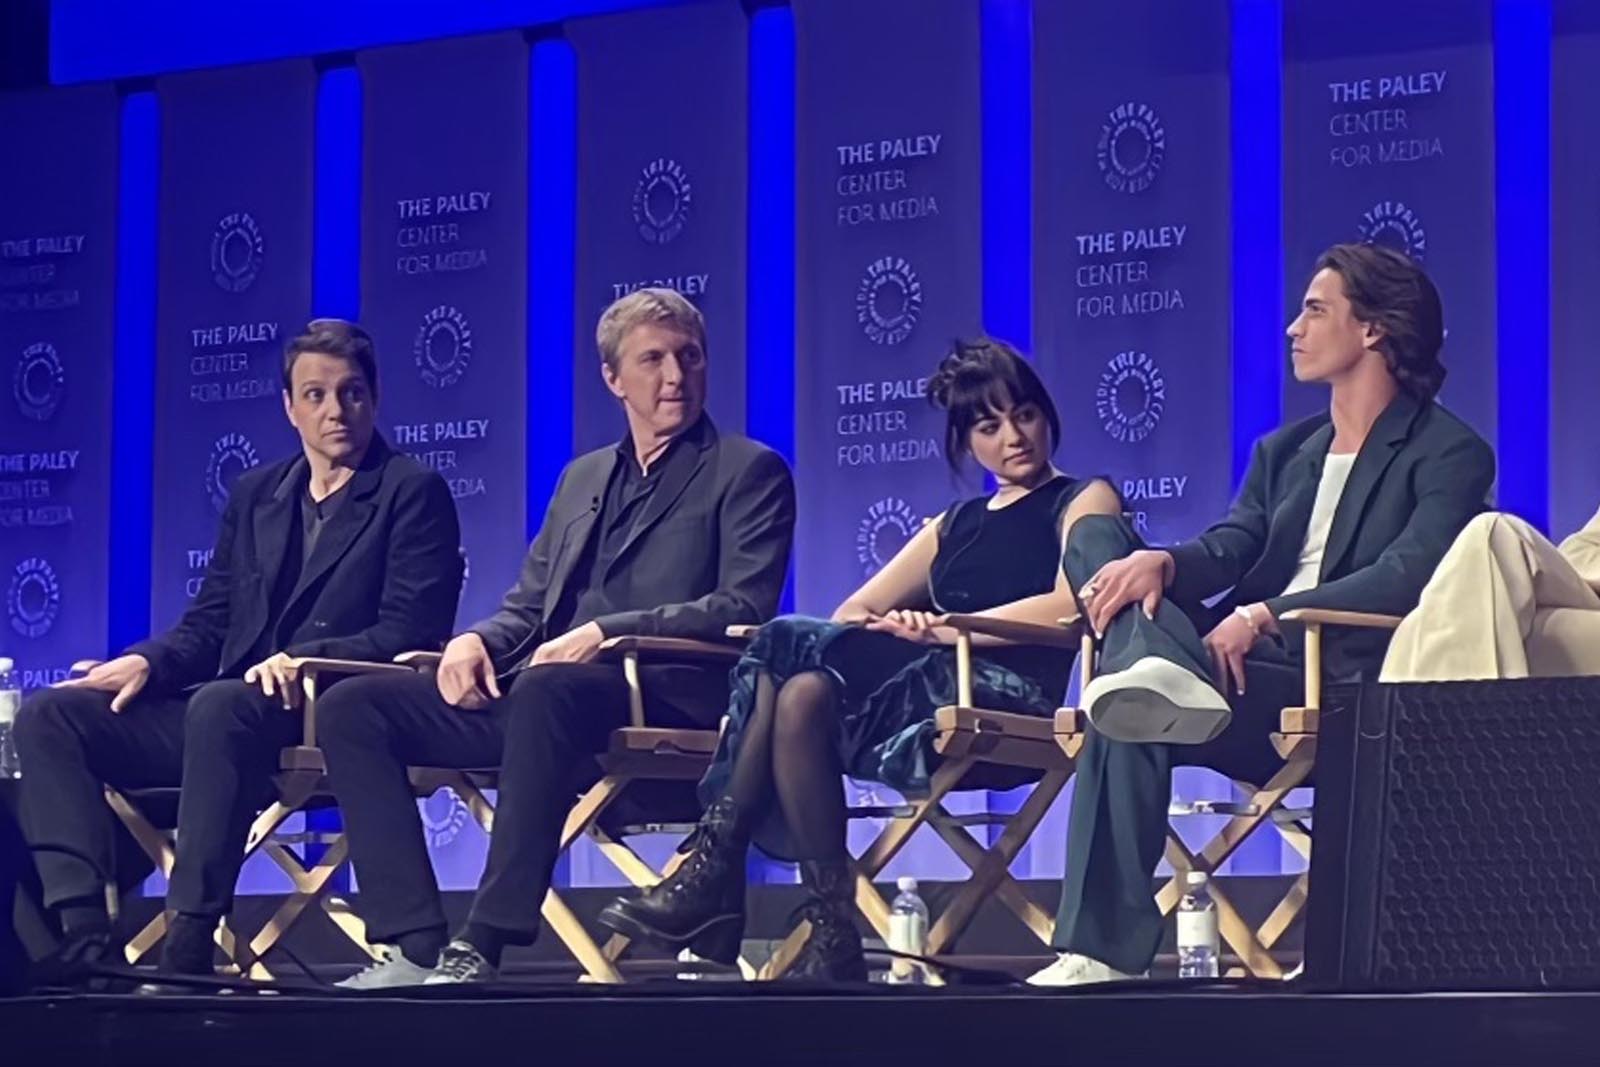 Stars on stage during panel